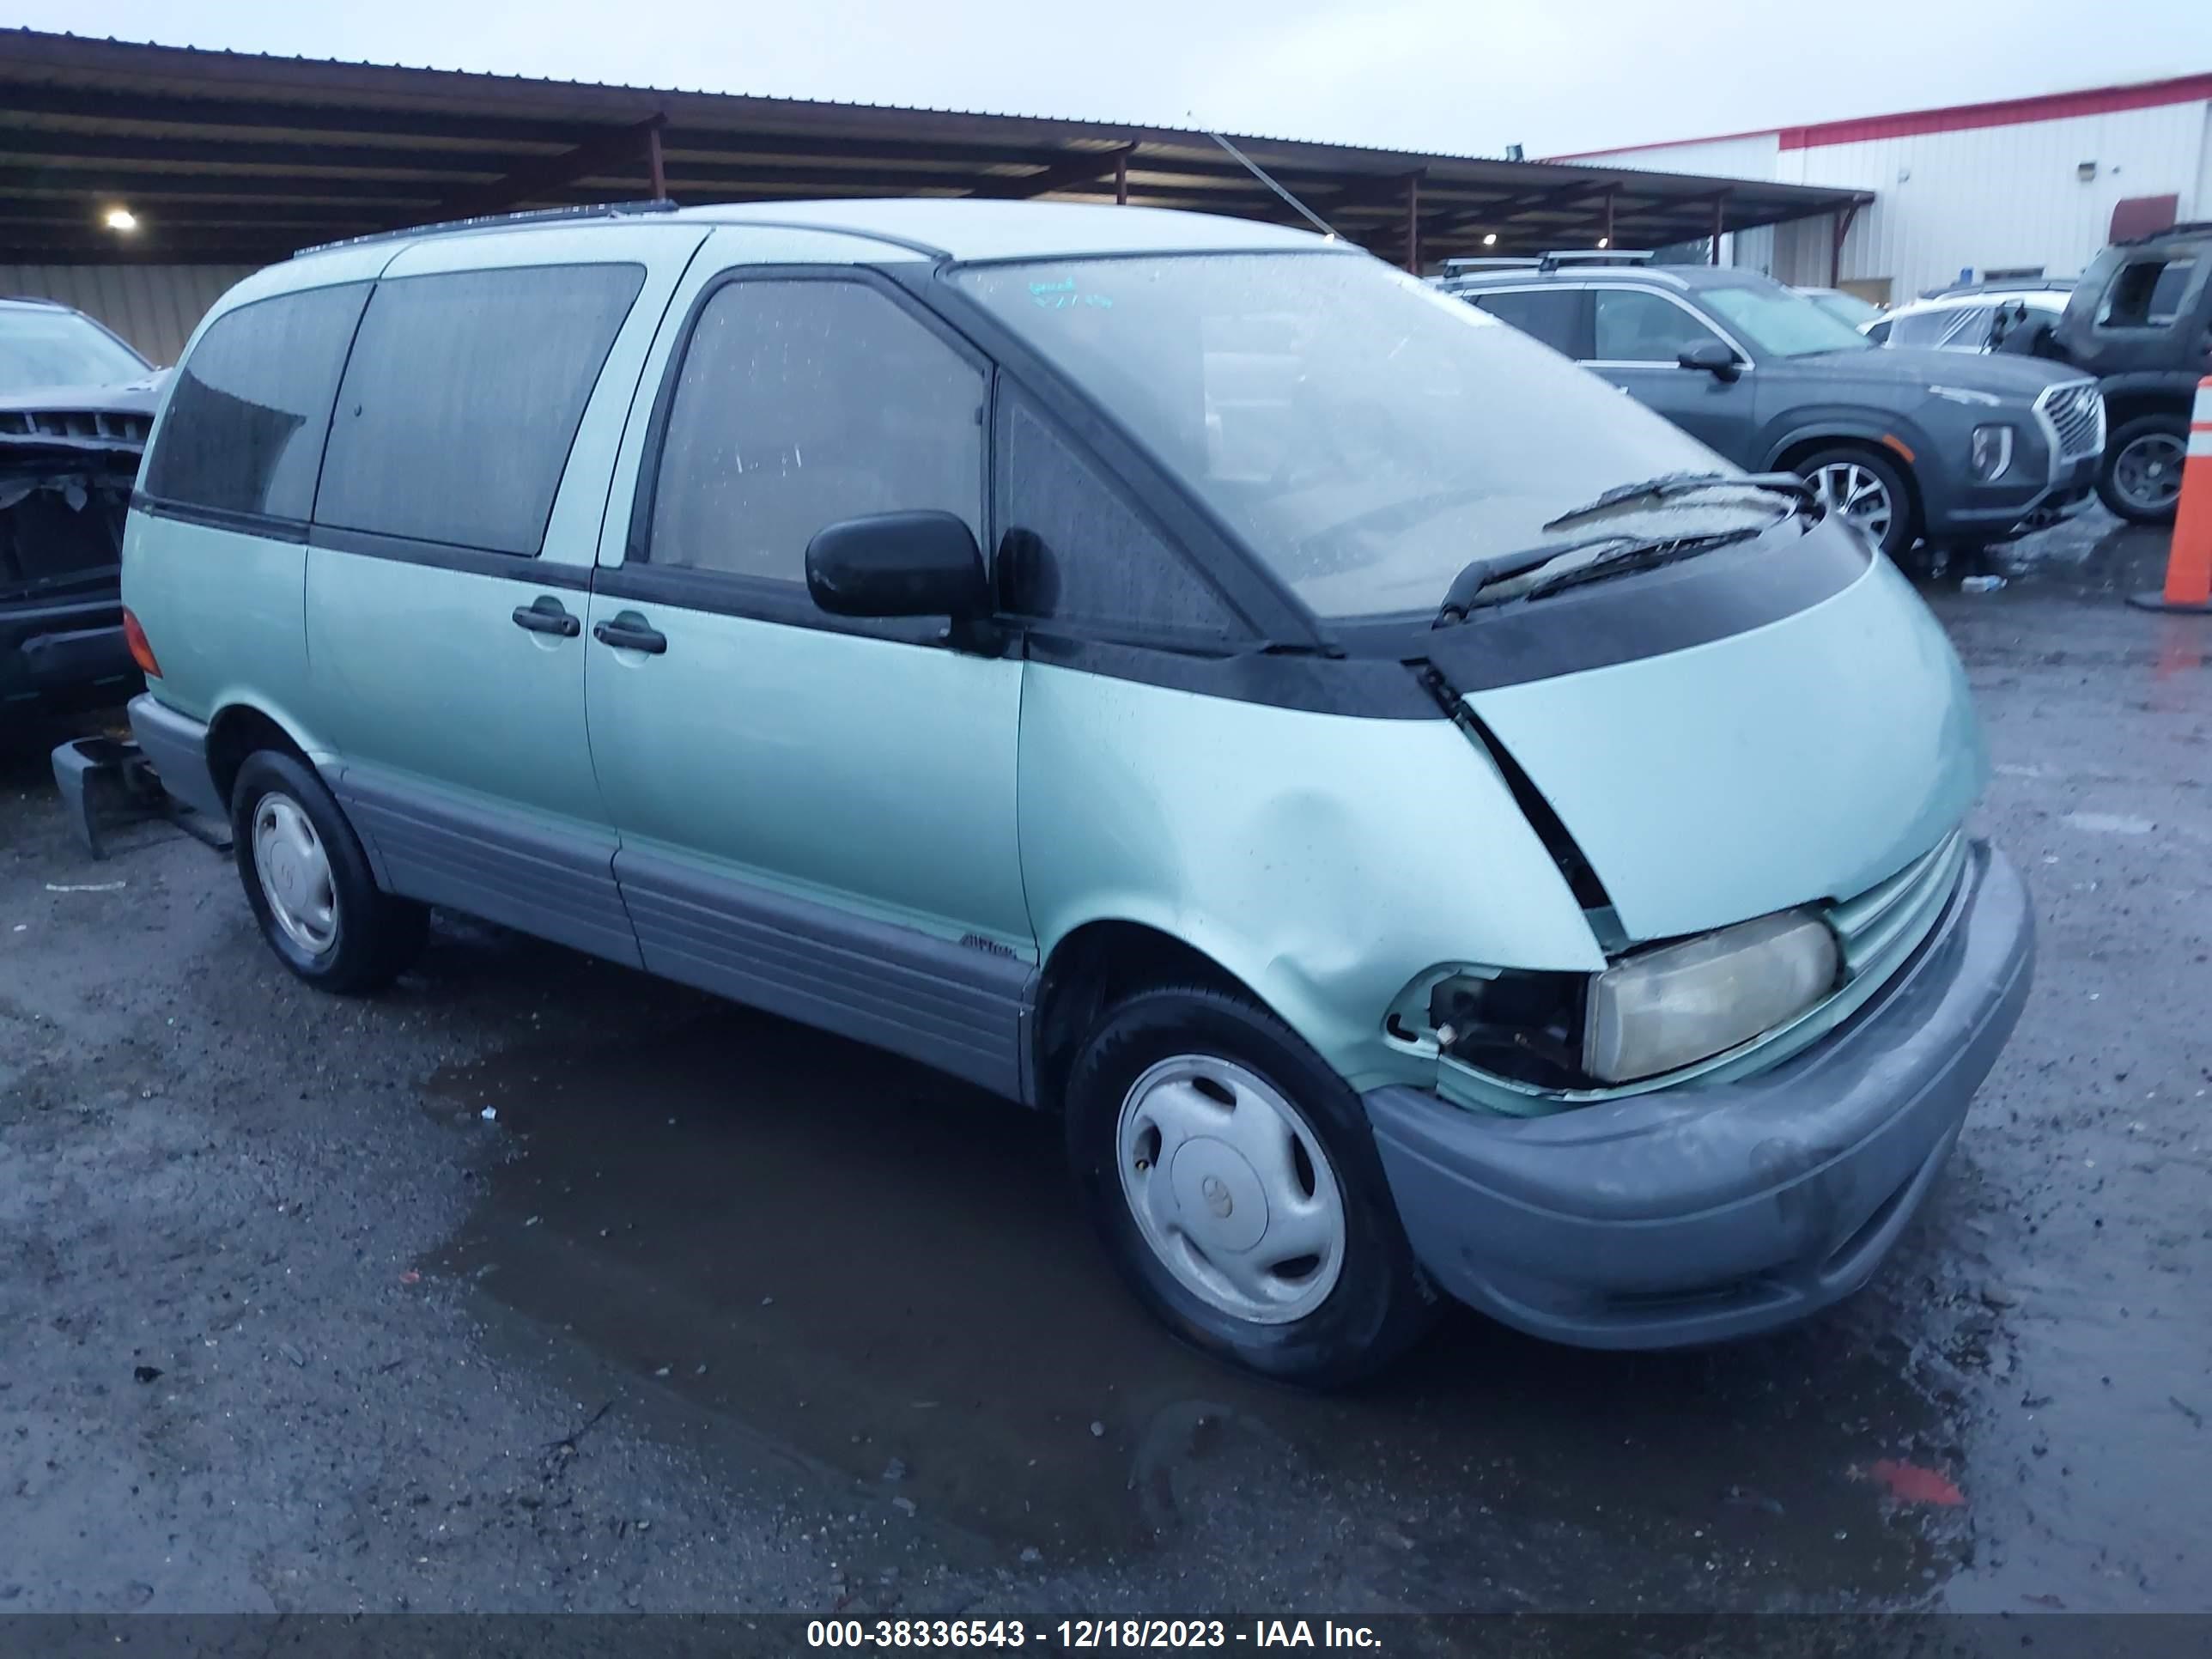 vin: JT3HK23M1V1070233 JT3HK23M1V1070233 1997 toyota previa 2400 for Sale in 94565, 2780 Willow Pass Road, Bay Point, California, USA